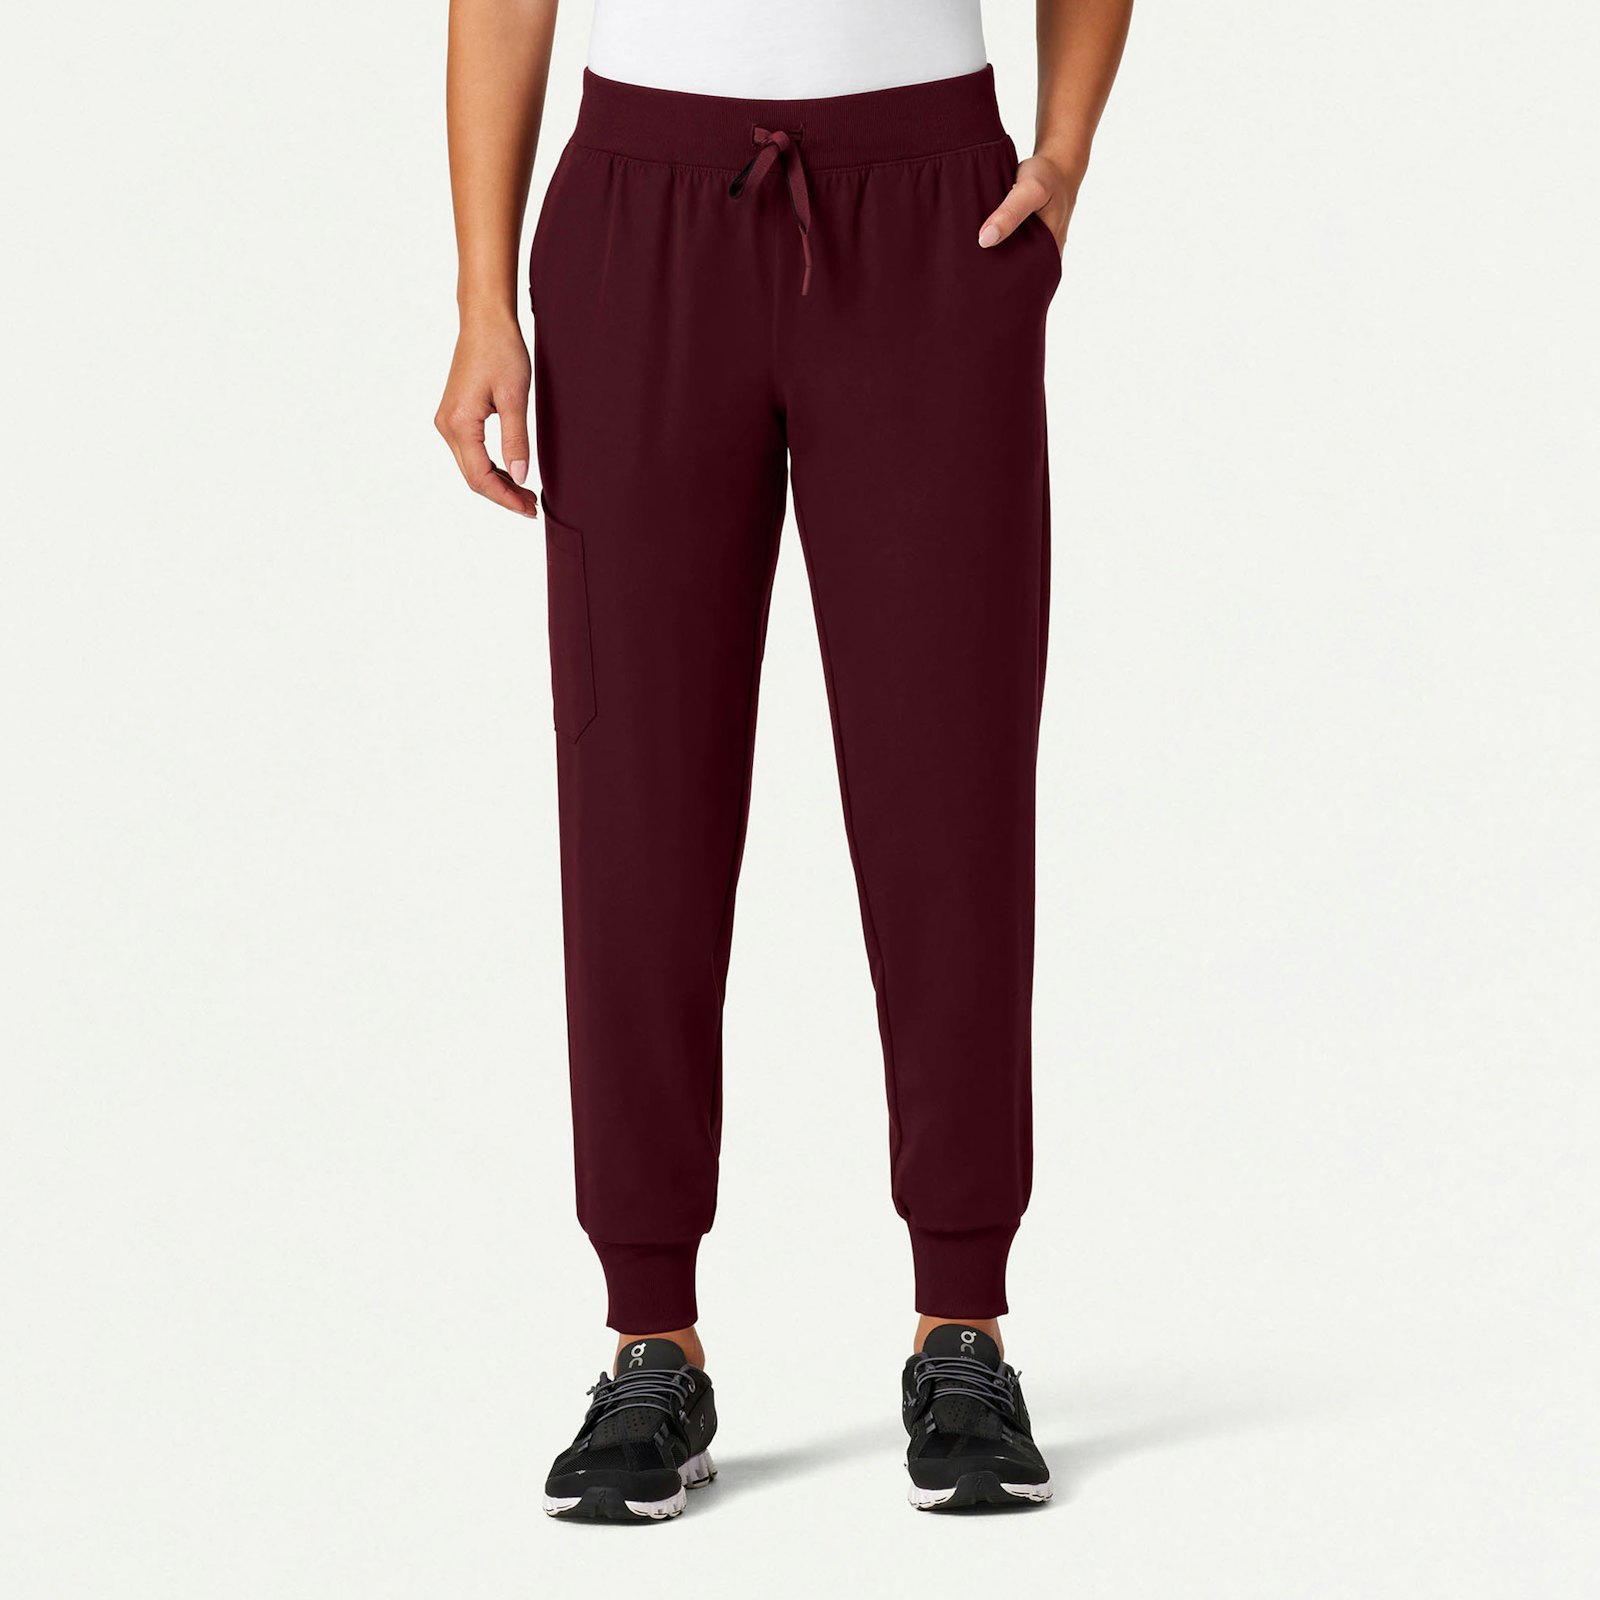 Women's Pants, Sweatpants & Joggers - Fitted Fit